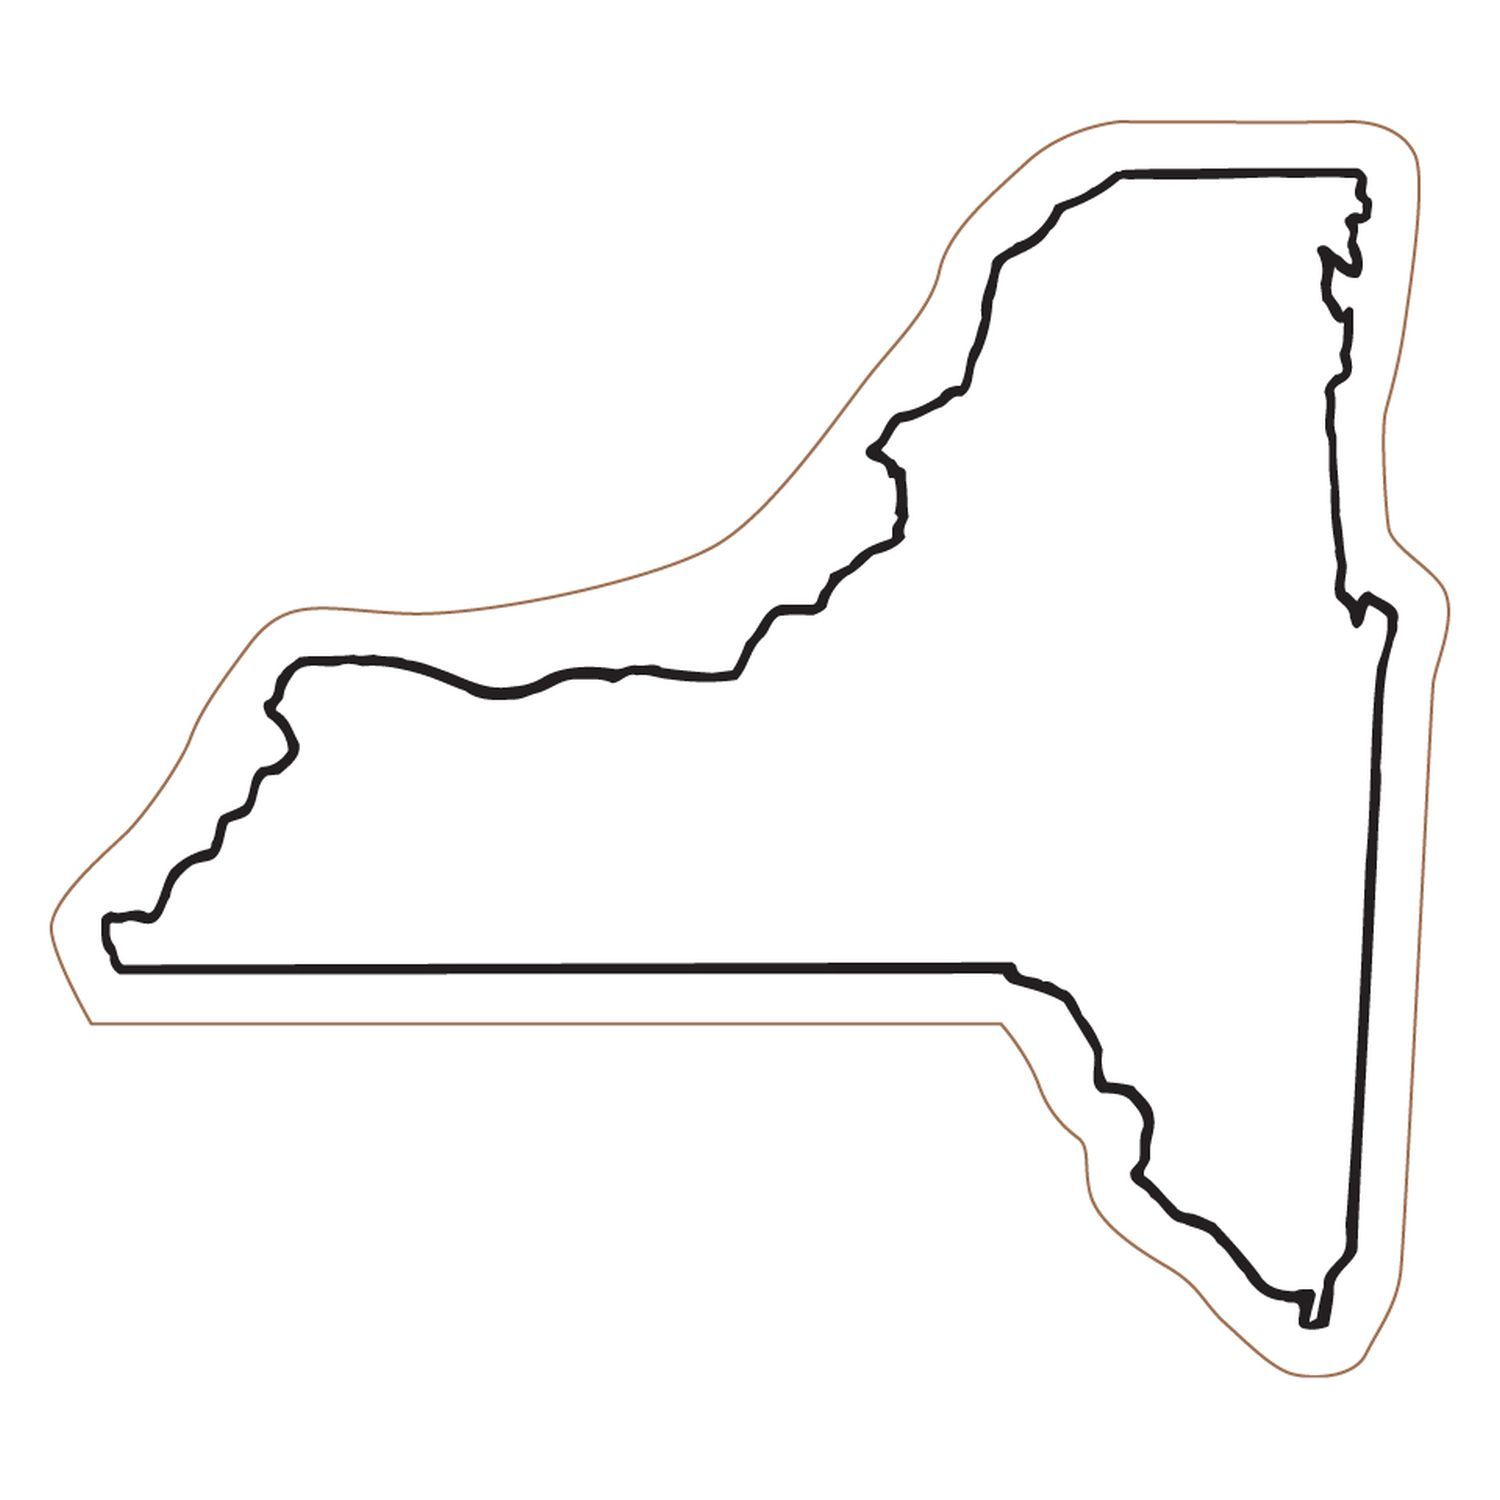 clip art of new york state - photo #17